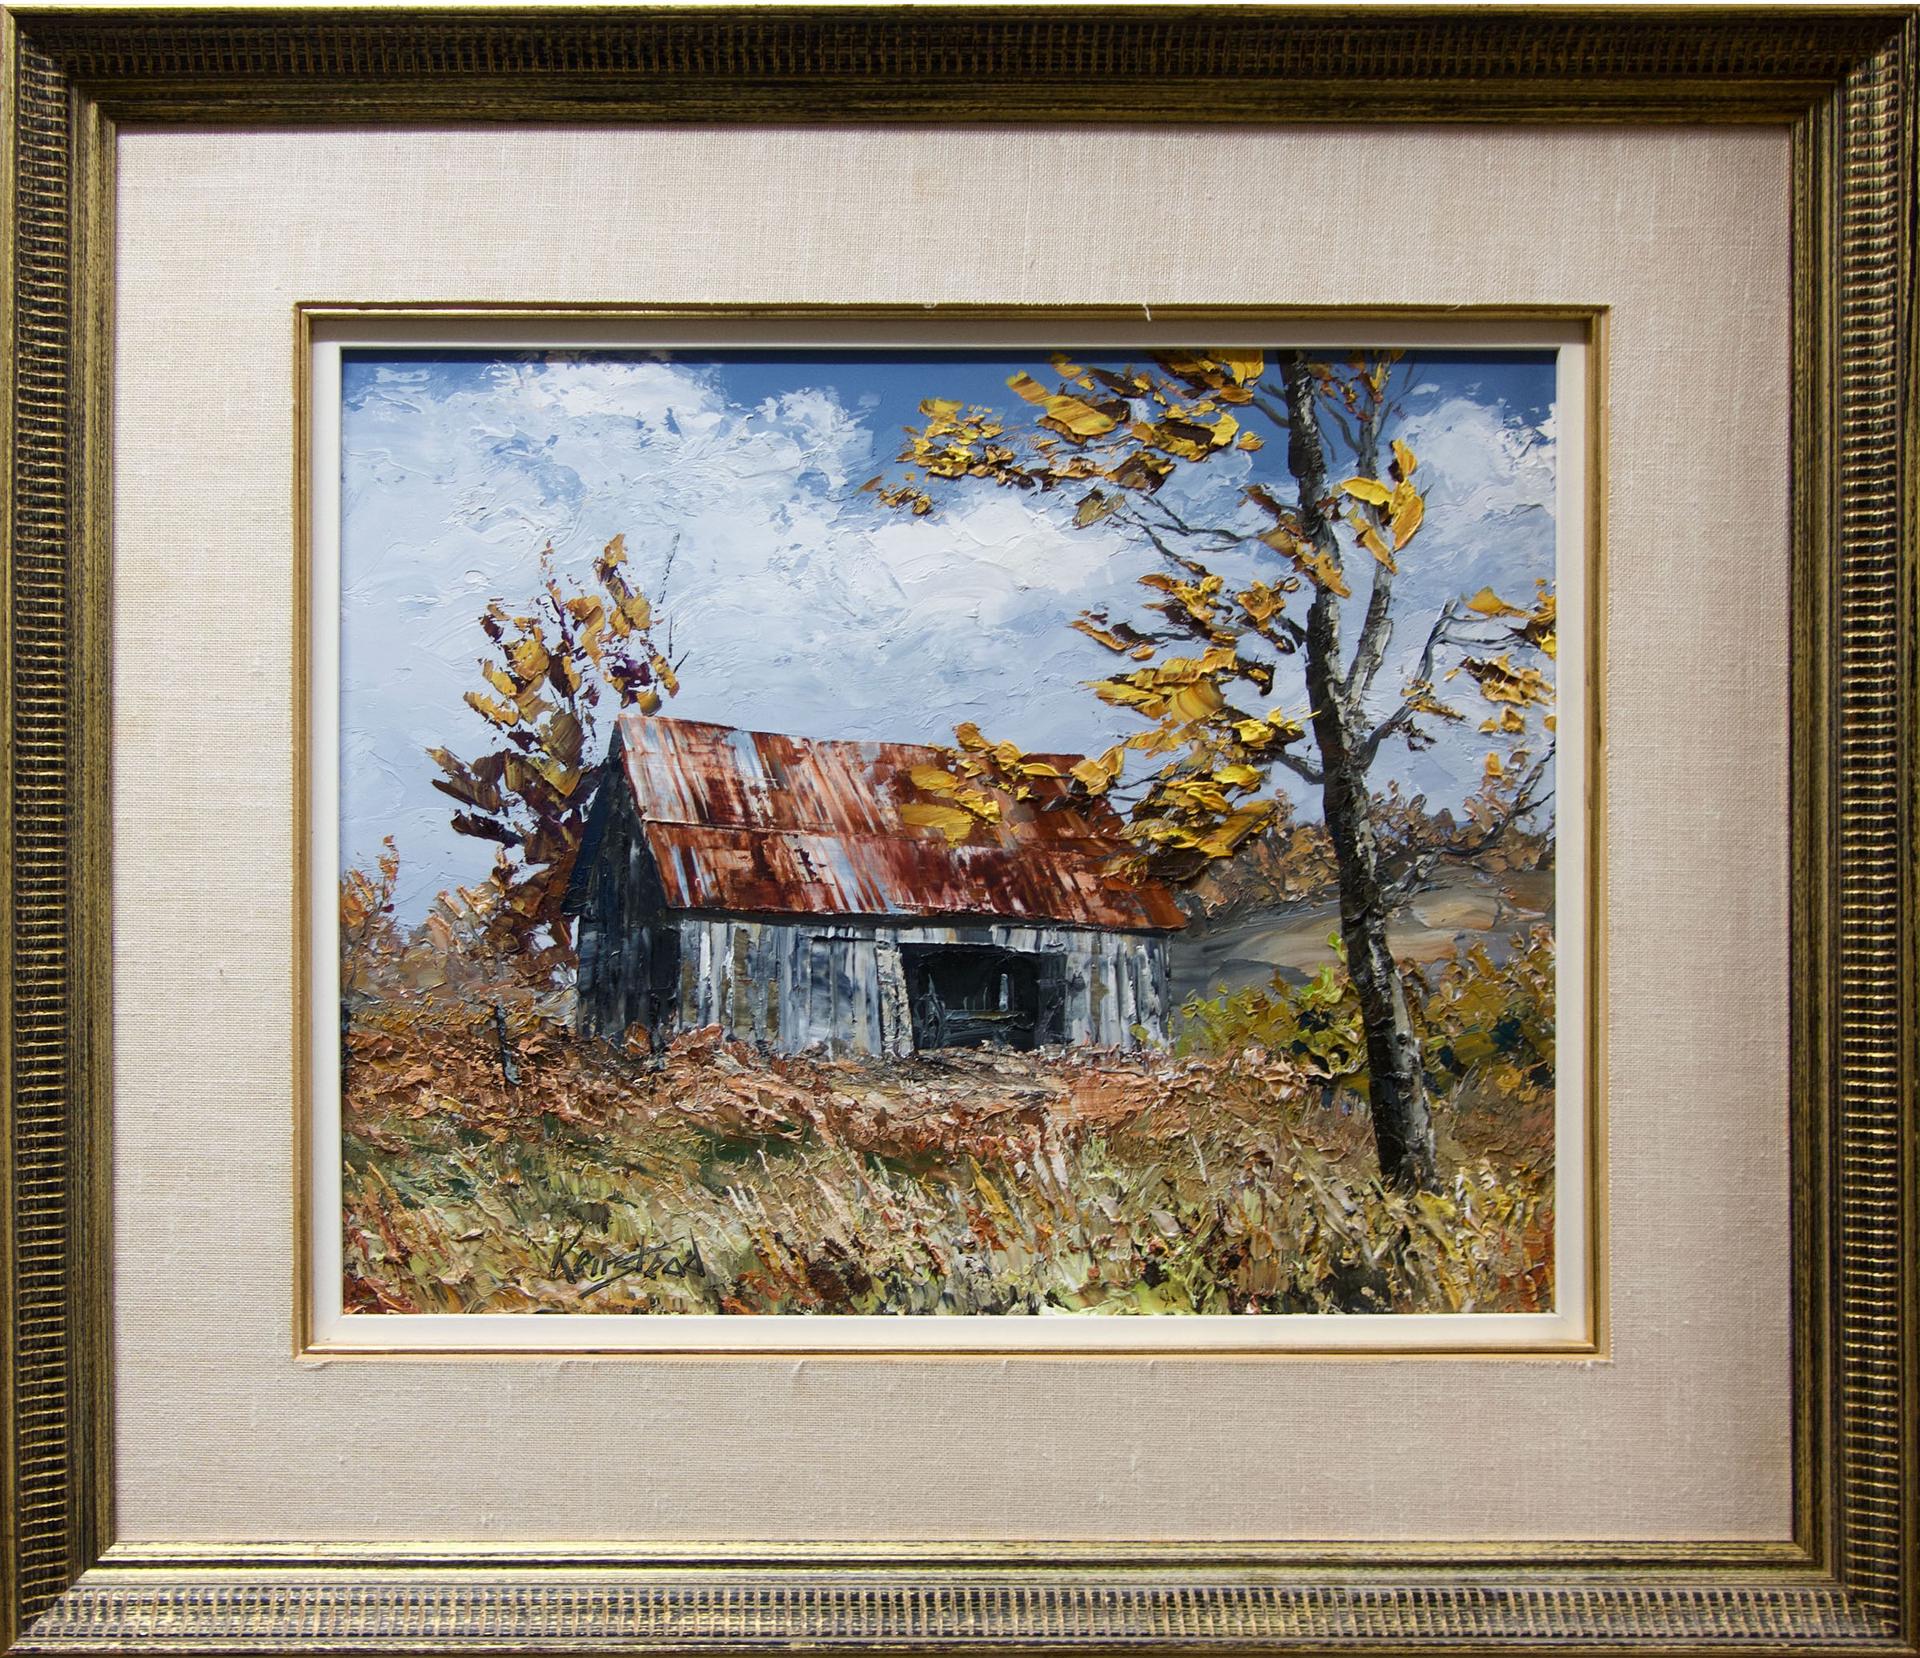 James Lorimer Keirstead (1932) - Untitled (Old Barn In Fall)